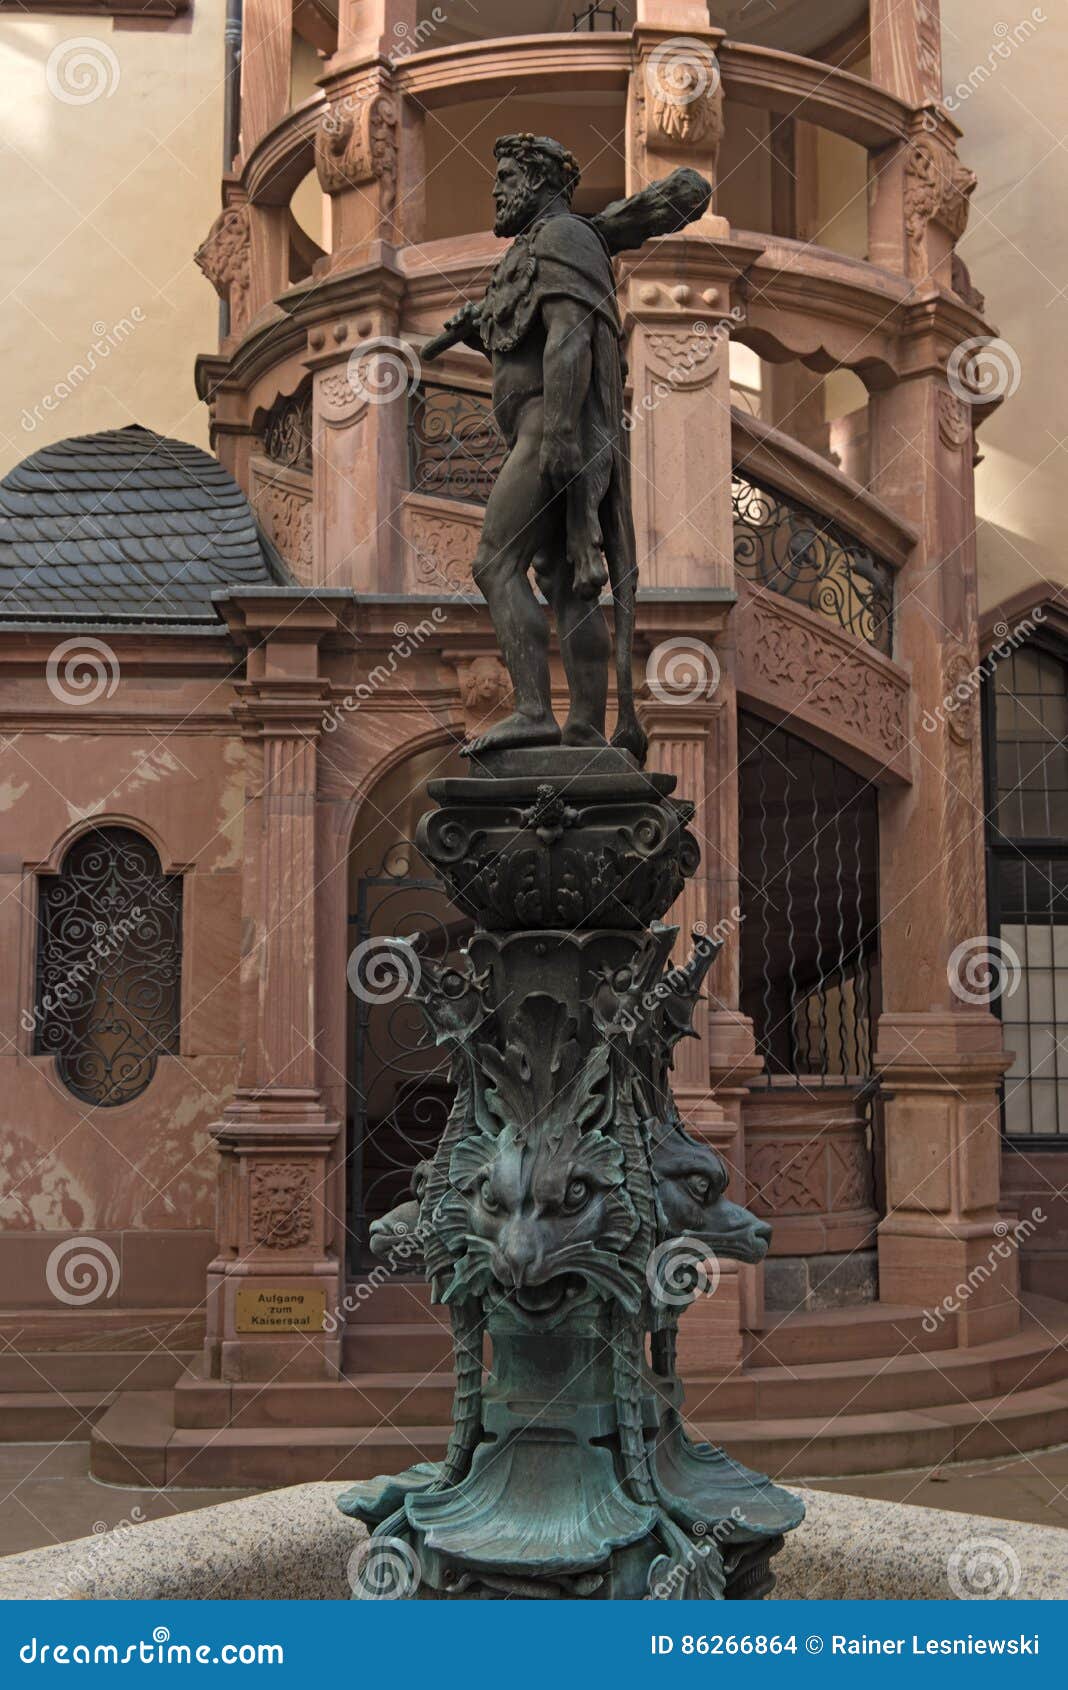 hercules fountain in the courtyard of the town hall roemer, frankfurt